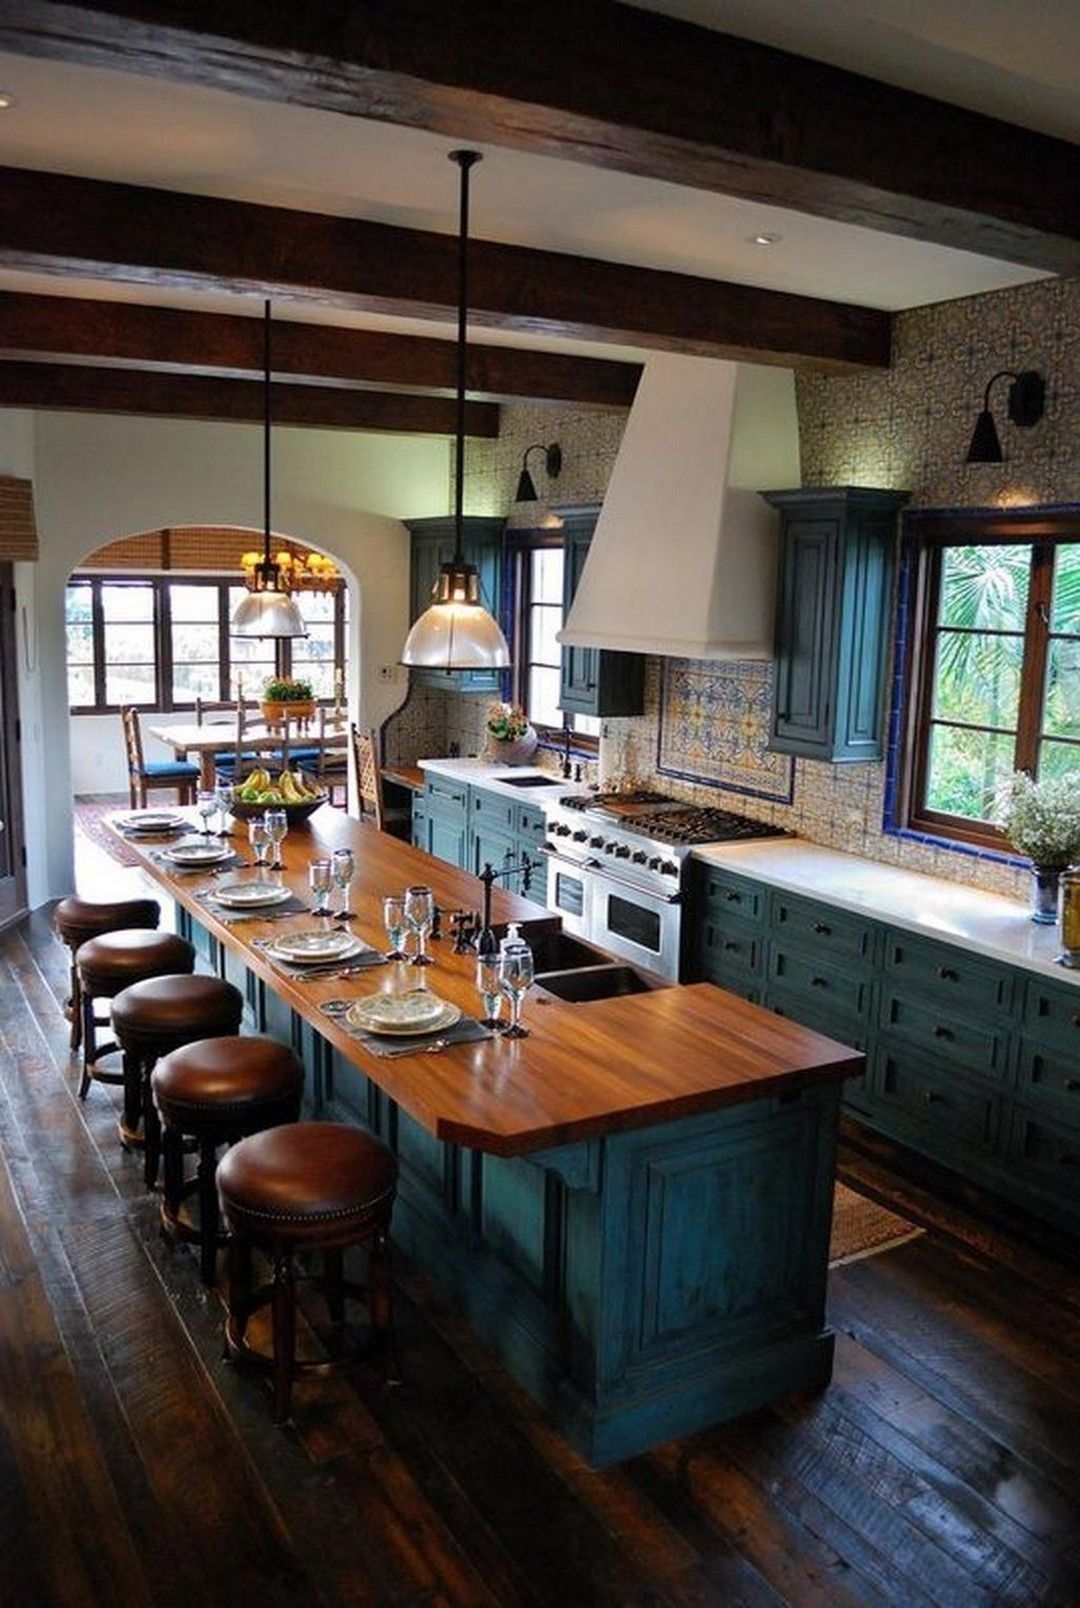 25 Stress-Free Rustic Kitchen Ideas (All Are Marvellous!) - 4A51949508952155453B81C5E10Fe687